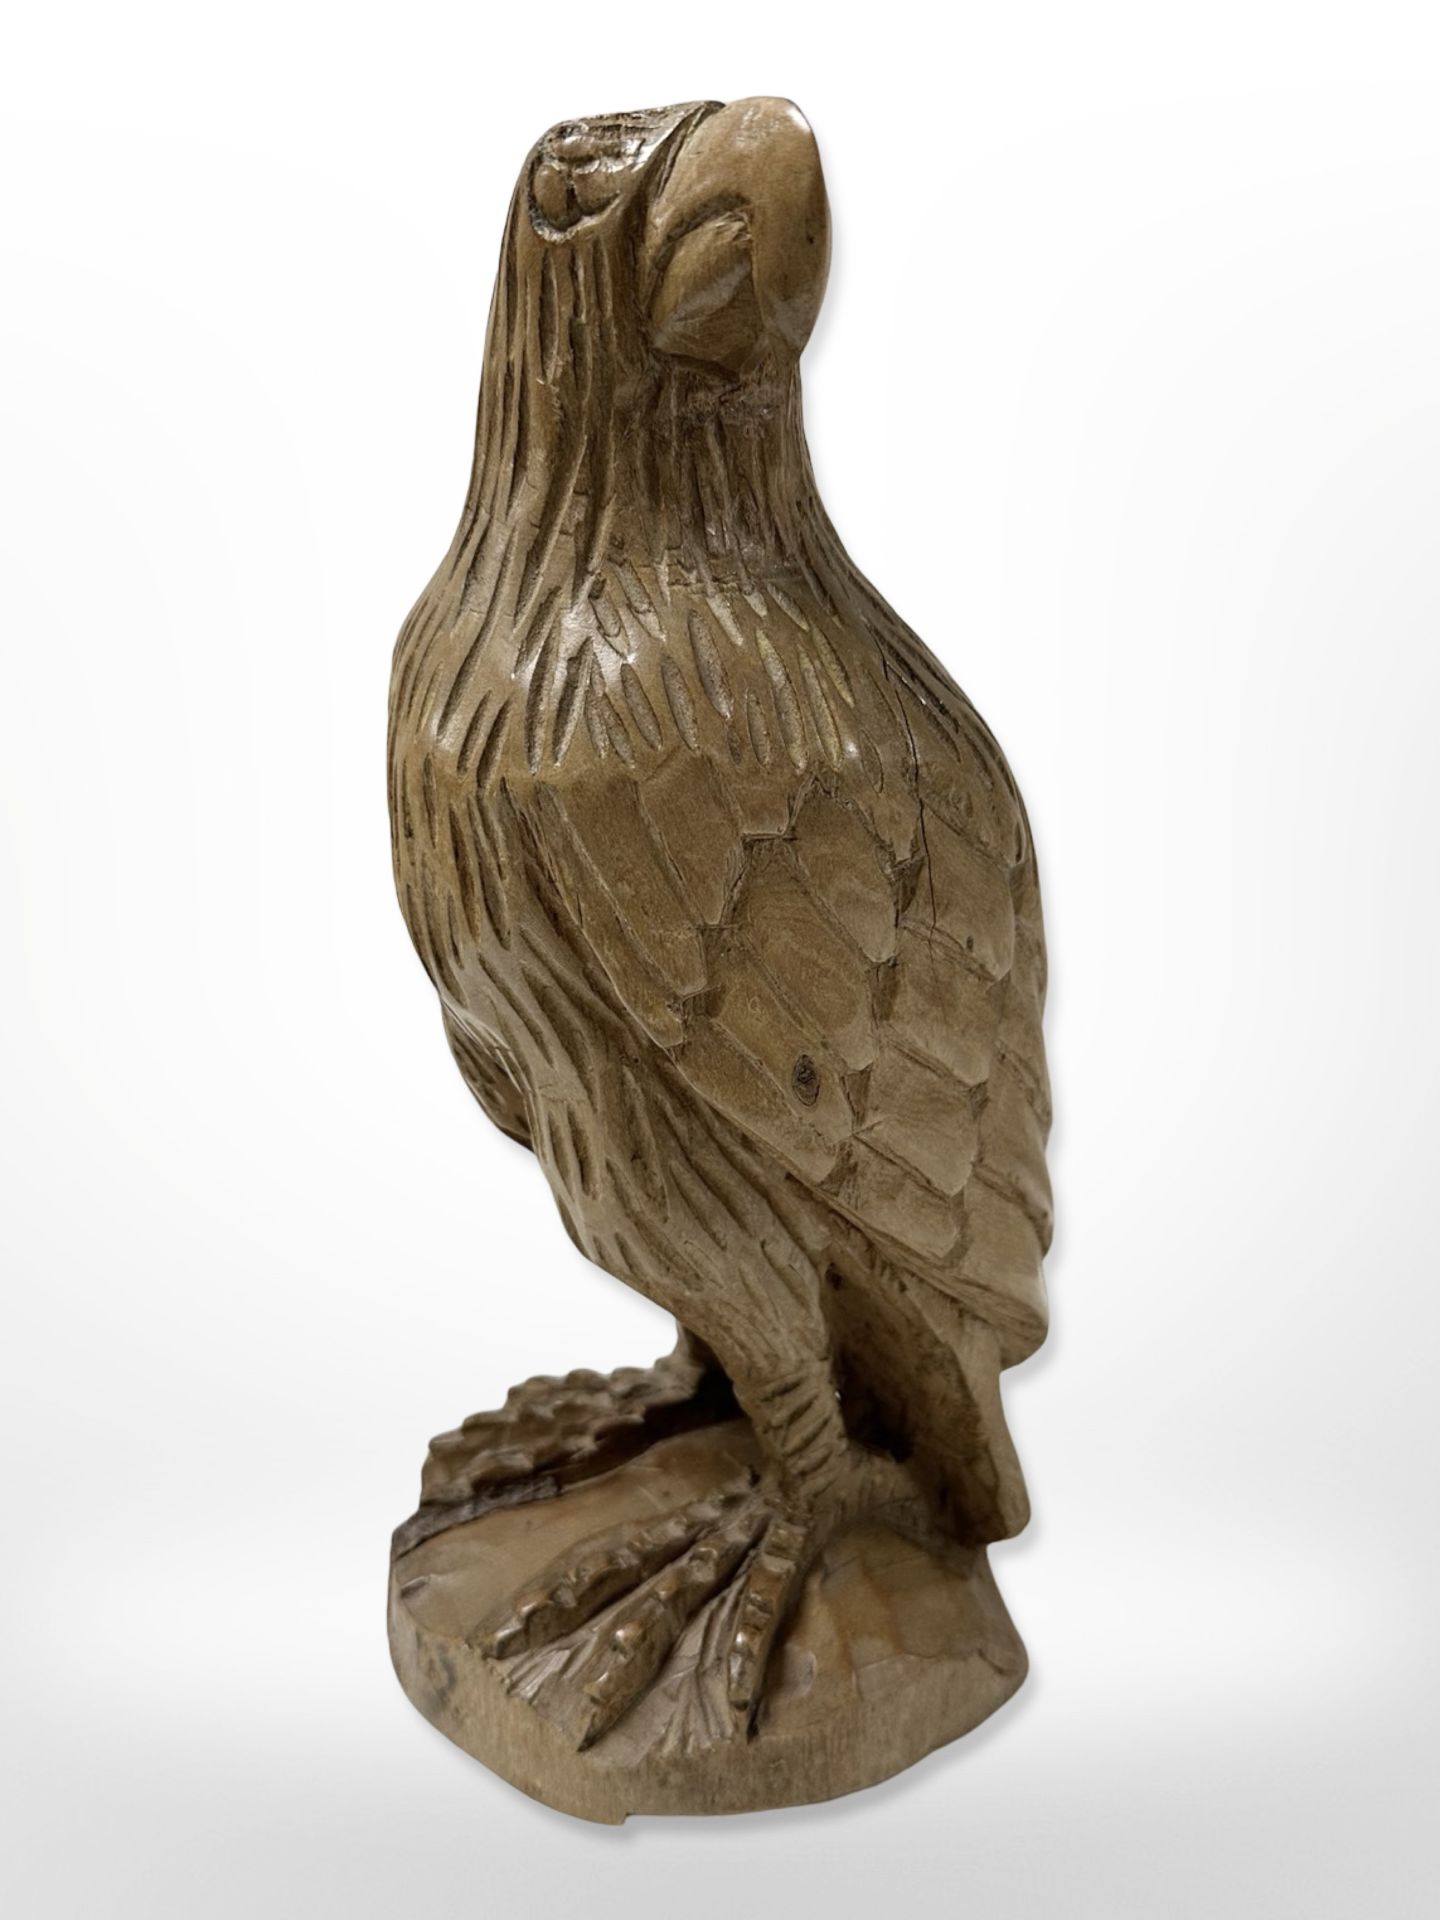 A carved wooden figure of an eagle, height 27 cm.